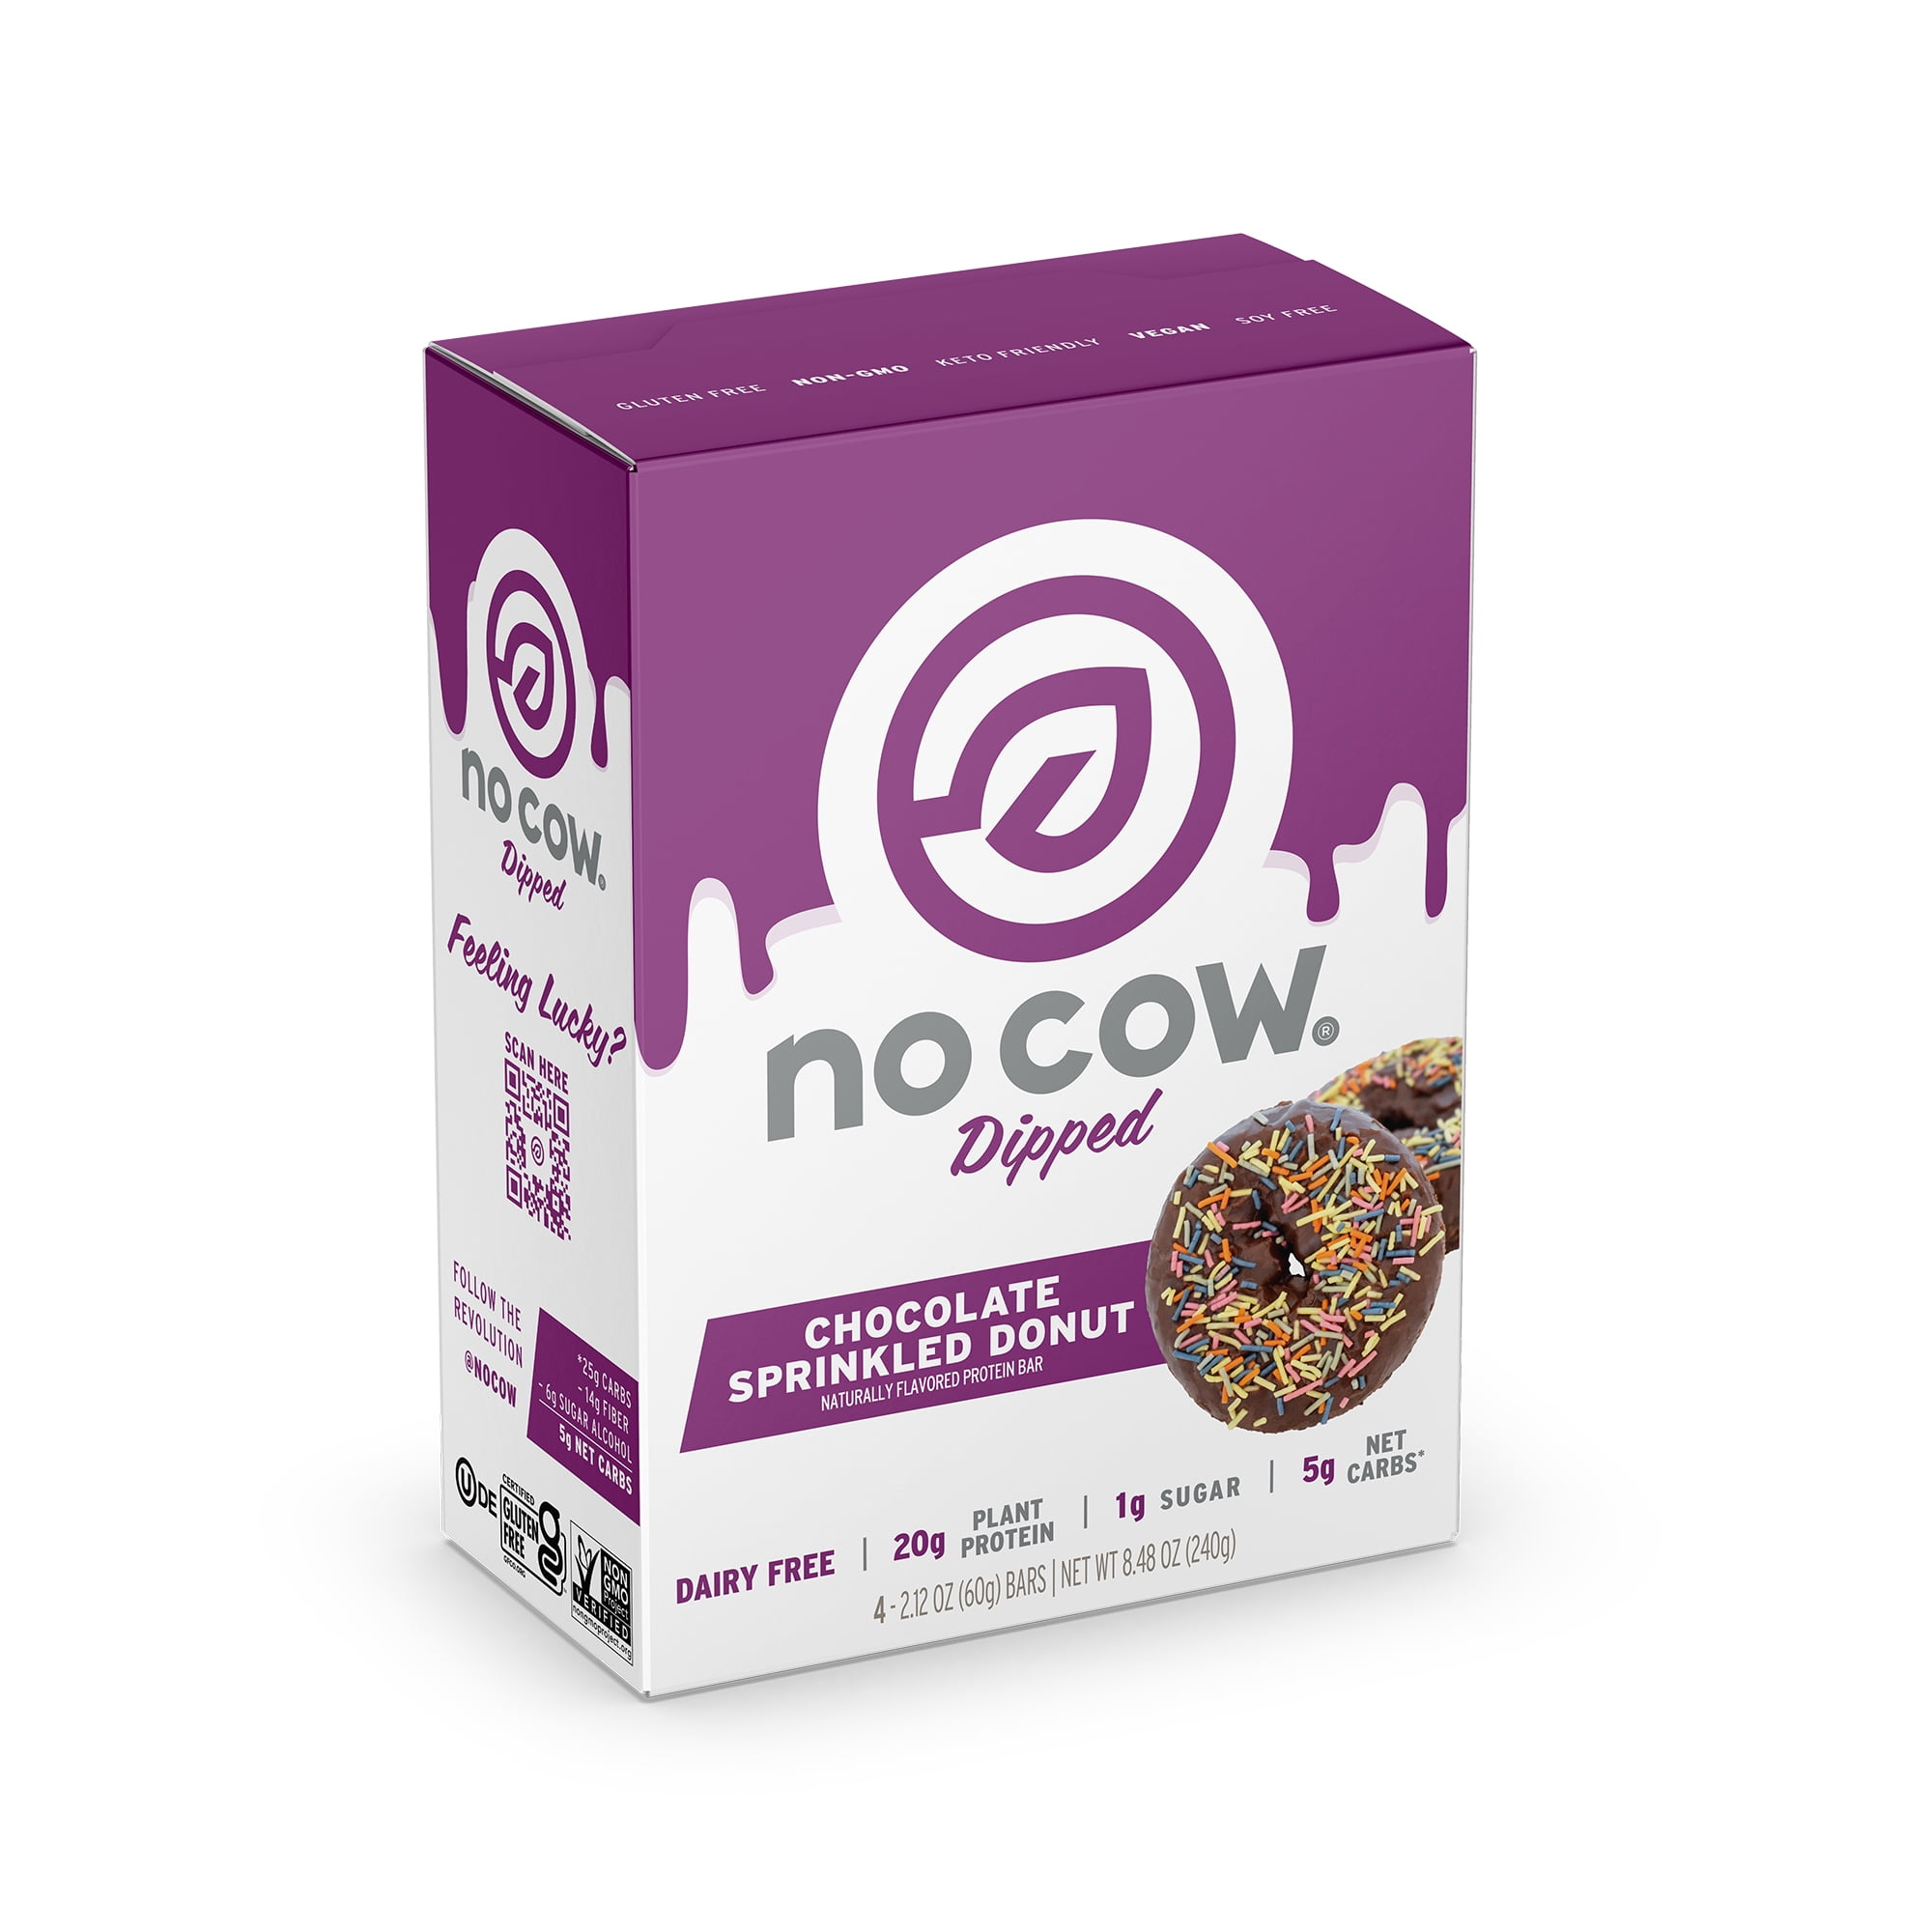 No Cow Dipped Protein Bars, Chocolate Sprinkled Donut, Pack of 4